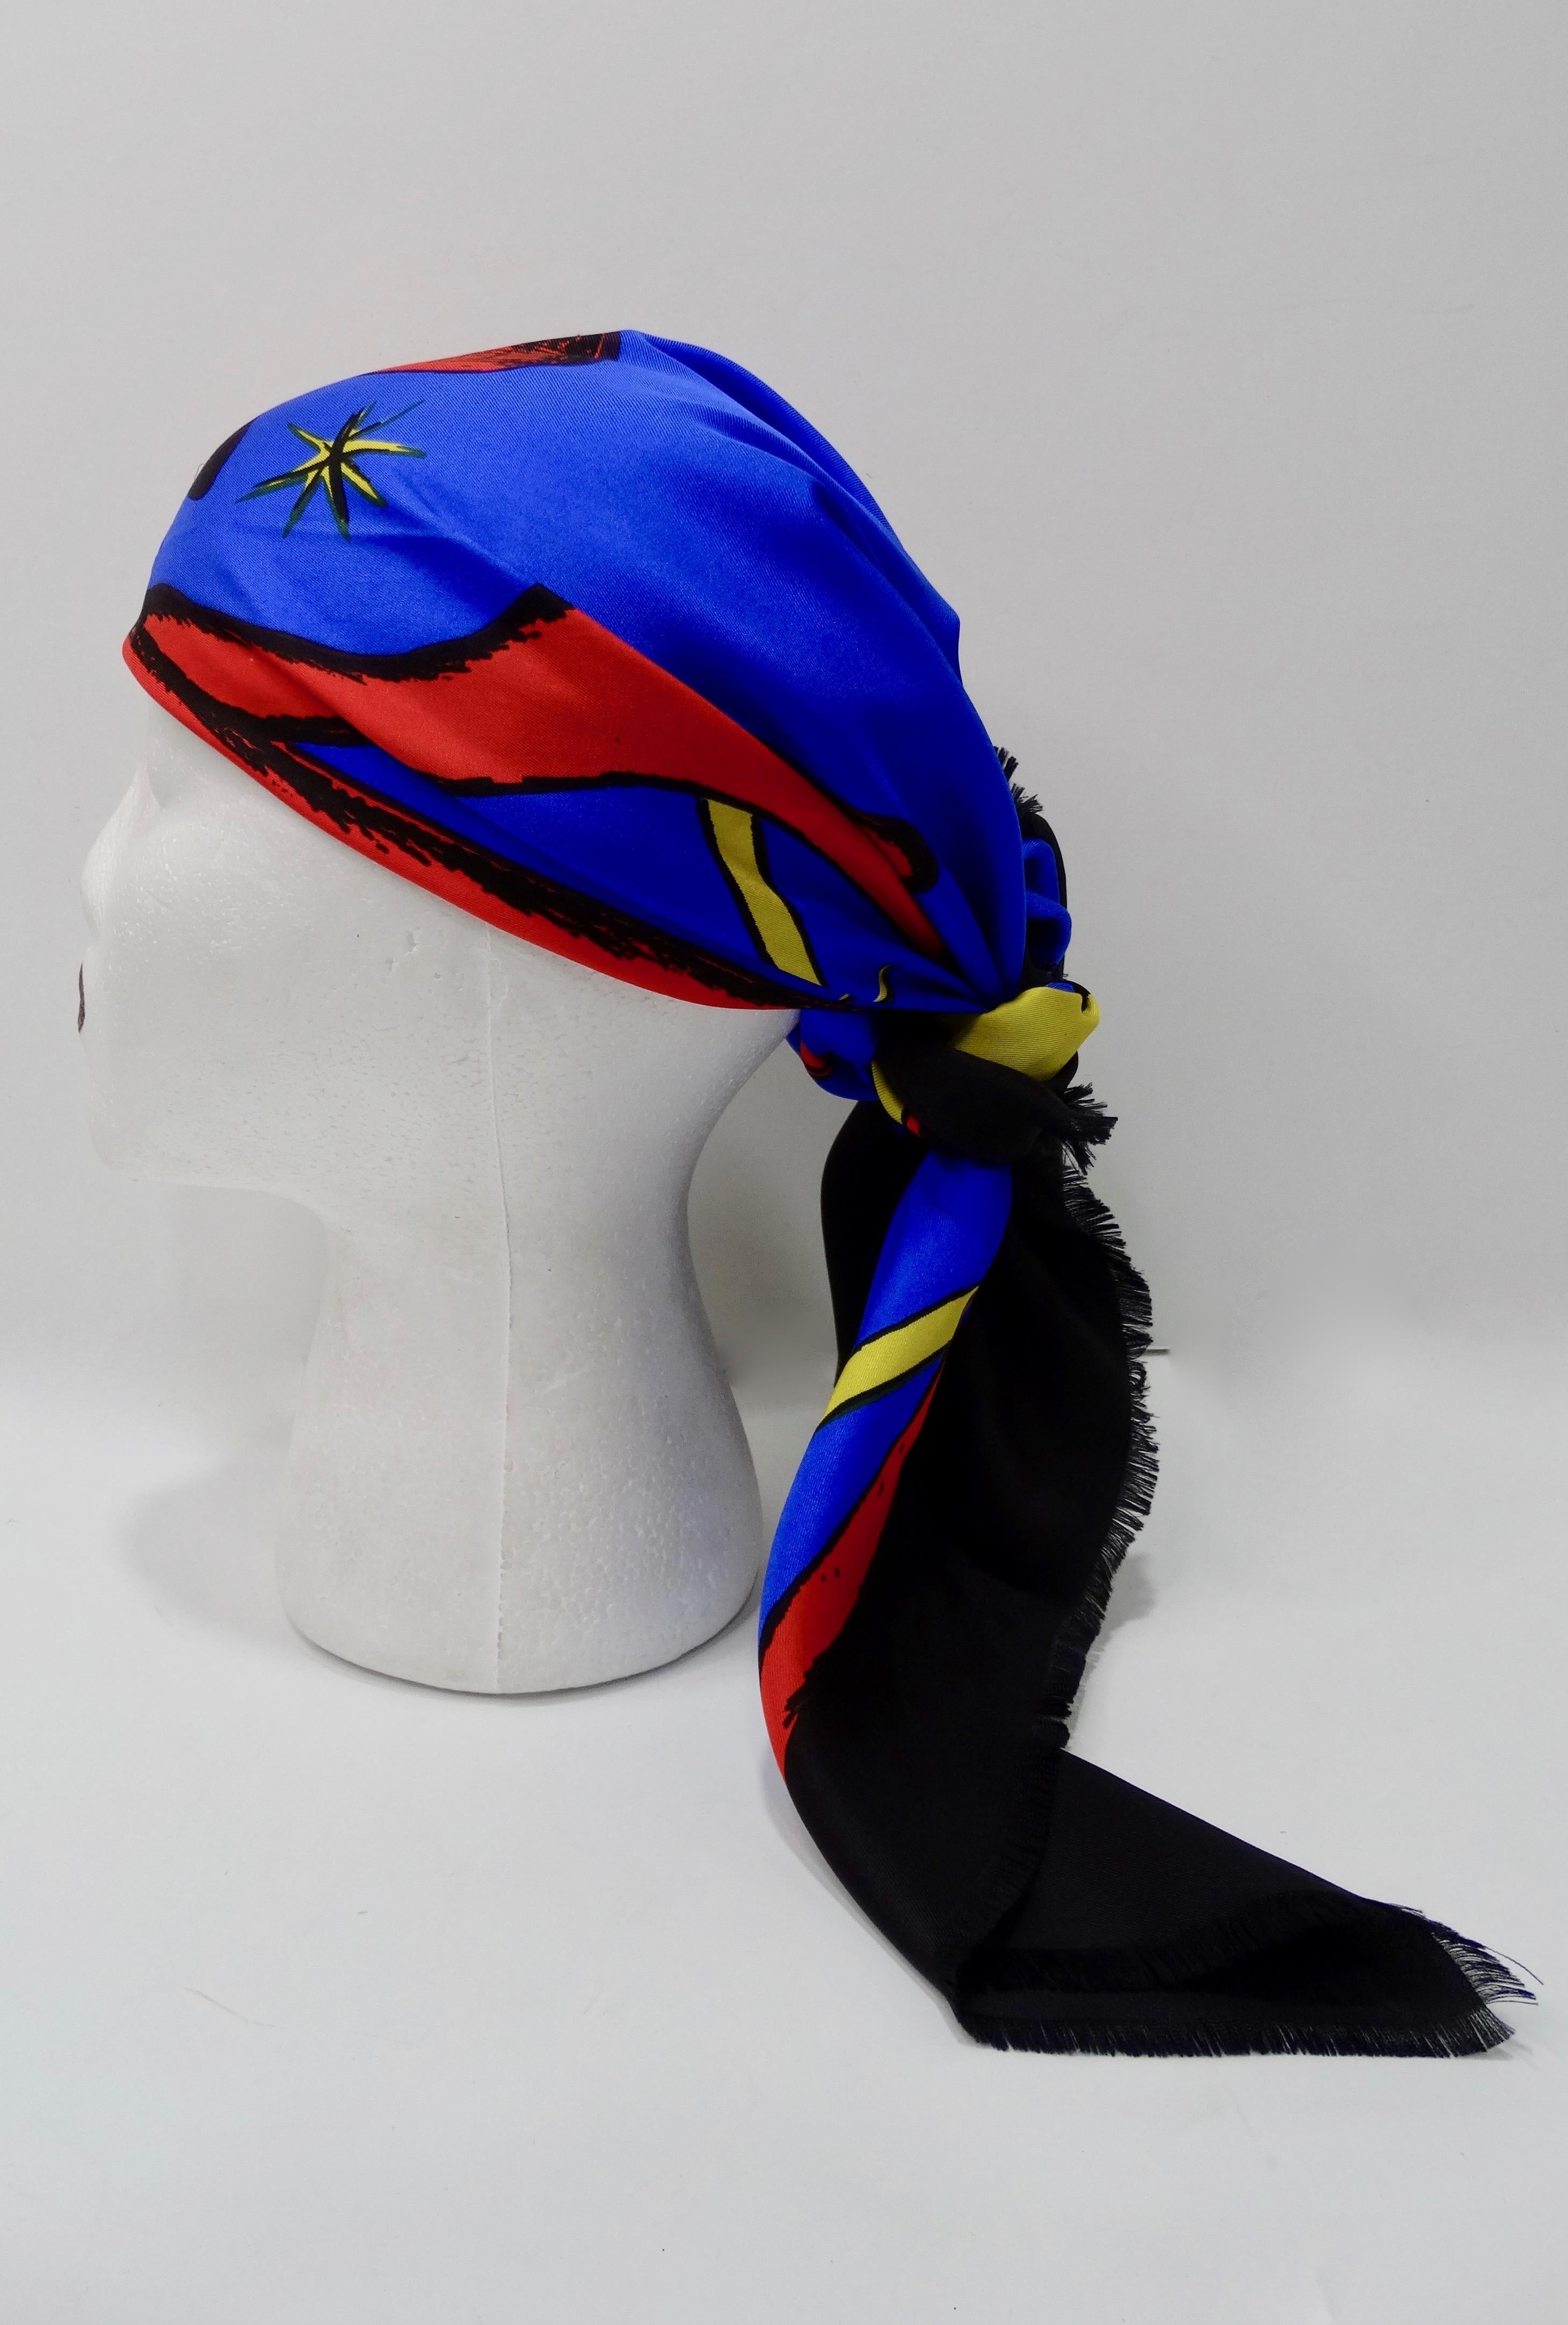 Take the holiday spirit with you every where you go with this amazingly rare Givenchy scarf! Circa 1980s, rendered in black, blue, gold and red this Silk scarf features a reindeer motif accented with candles and stars. Includes 'Best Wishes'